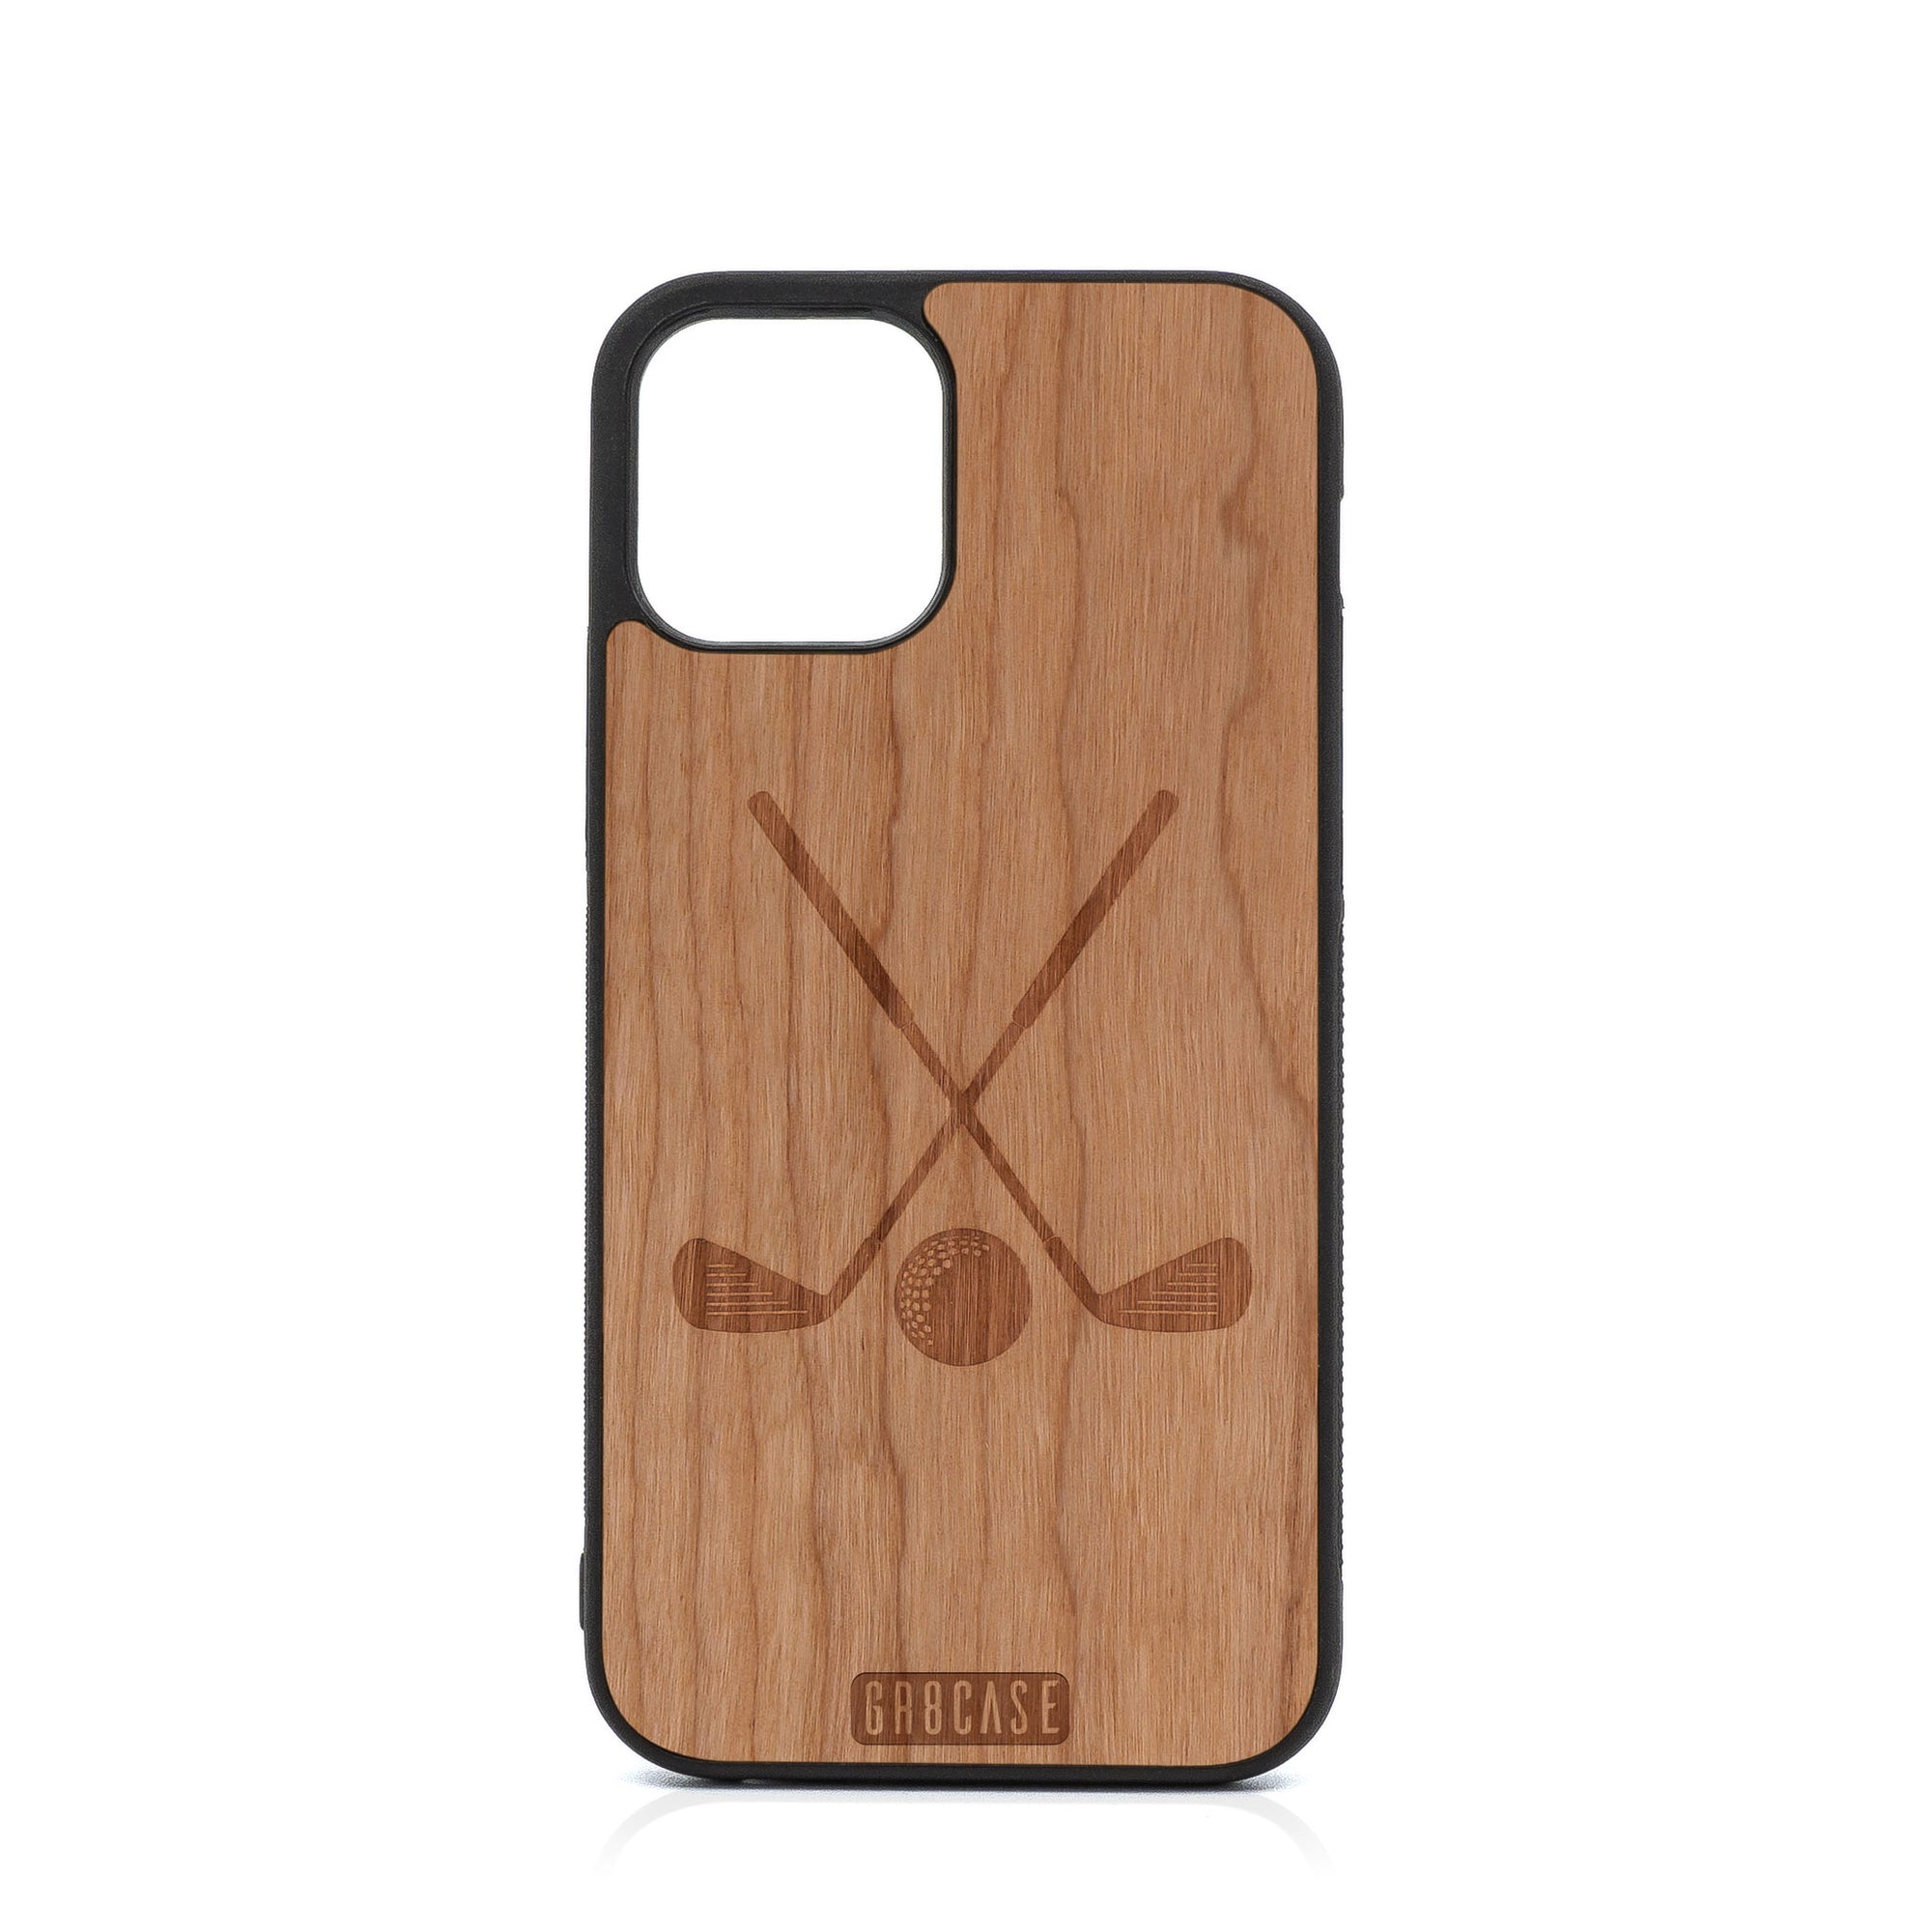 Golf Design Wood Case For iPhone 12